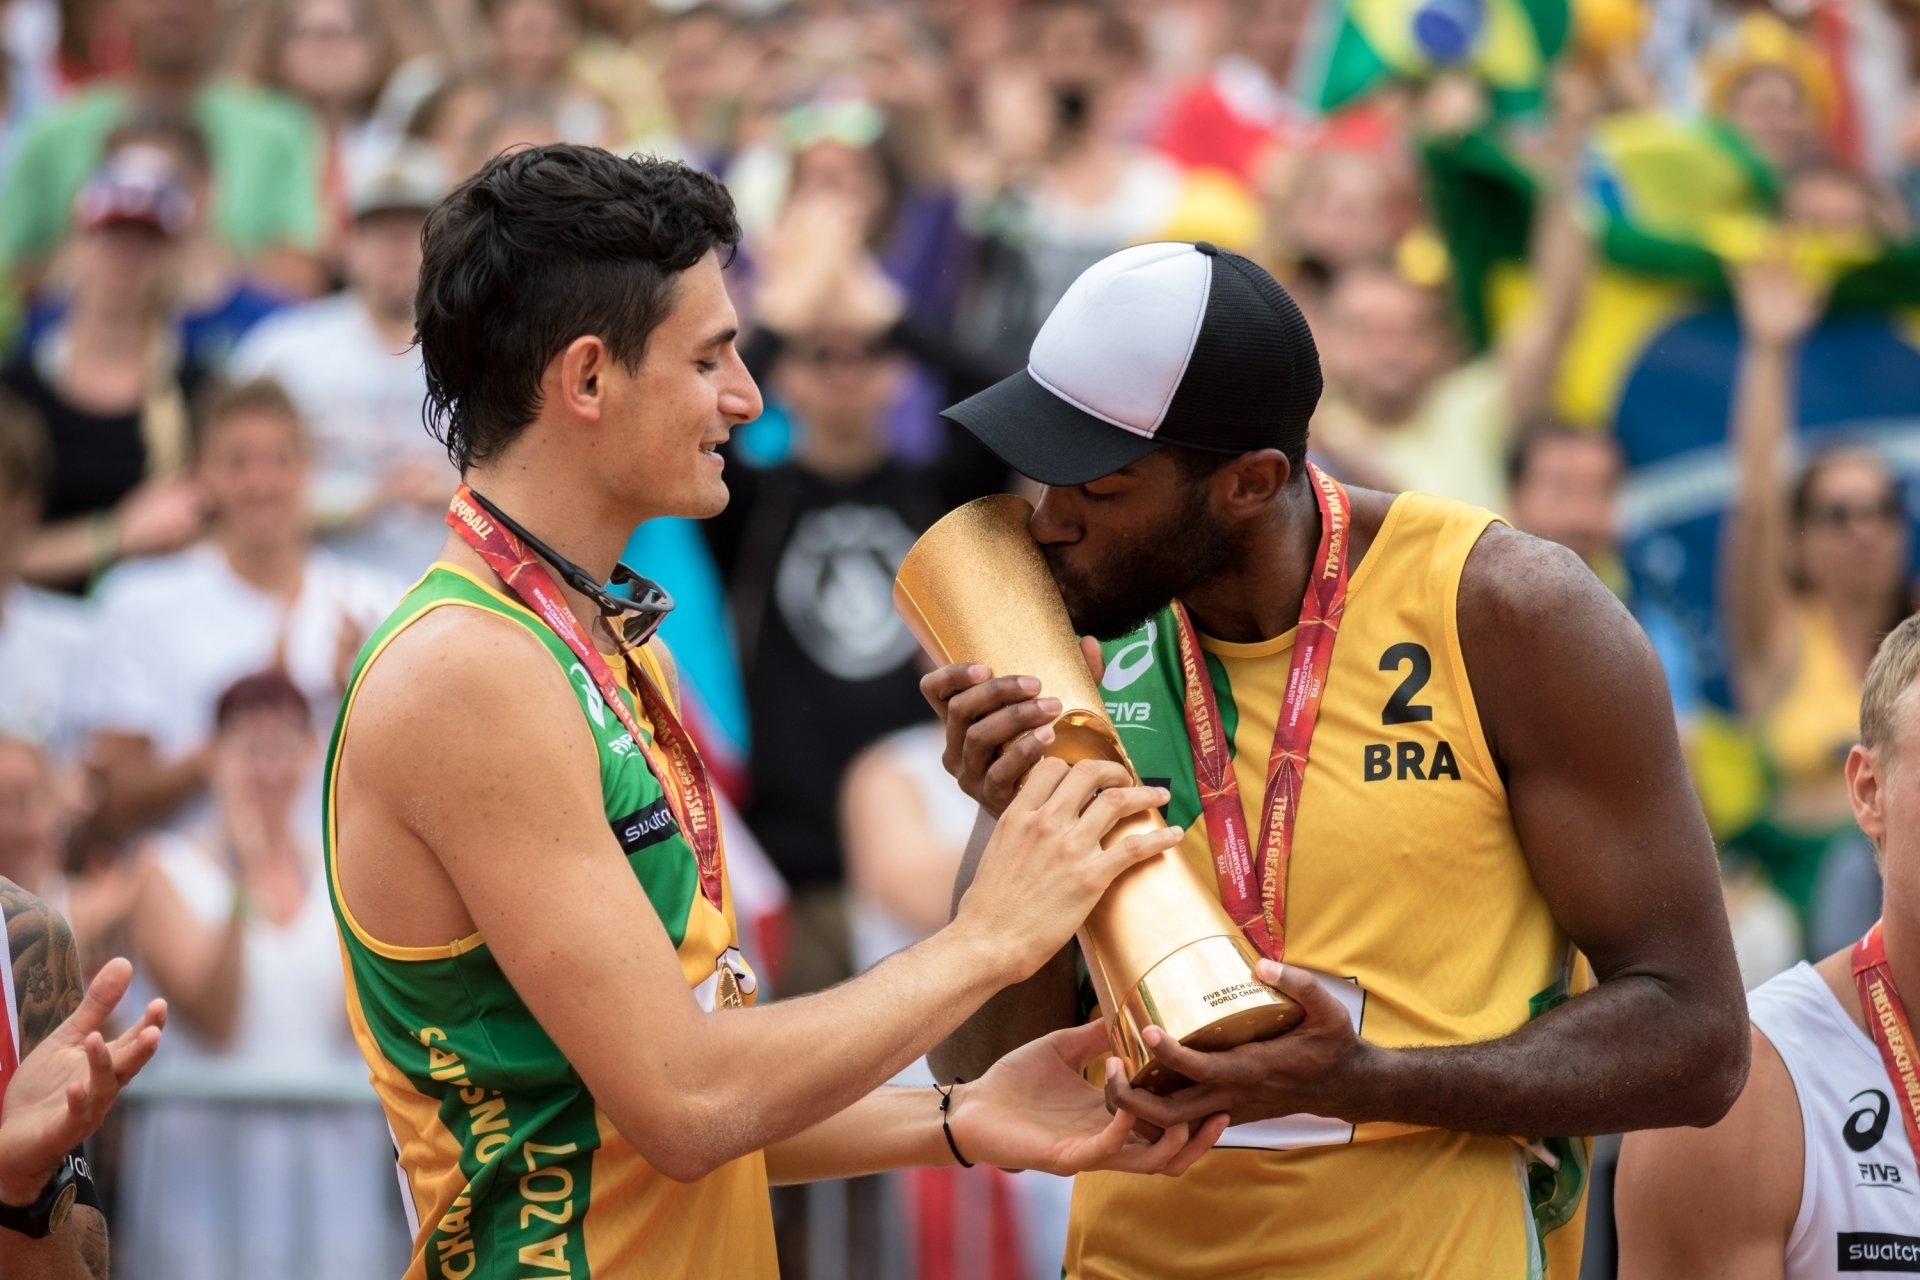 World Champions Evandro (right) and Andre won the Brazilian Tour title in the 2017-2018 season